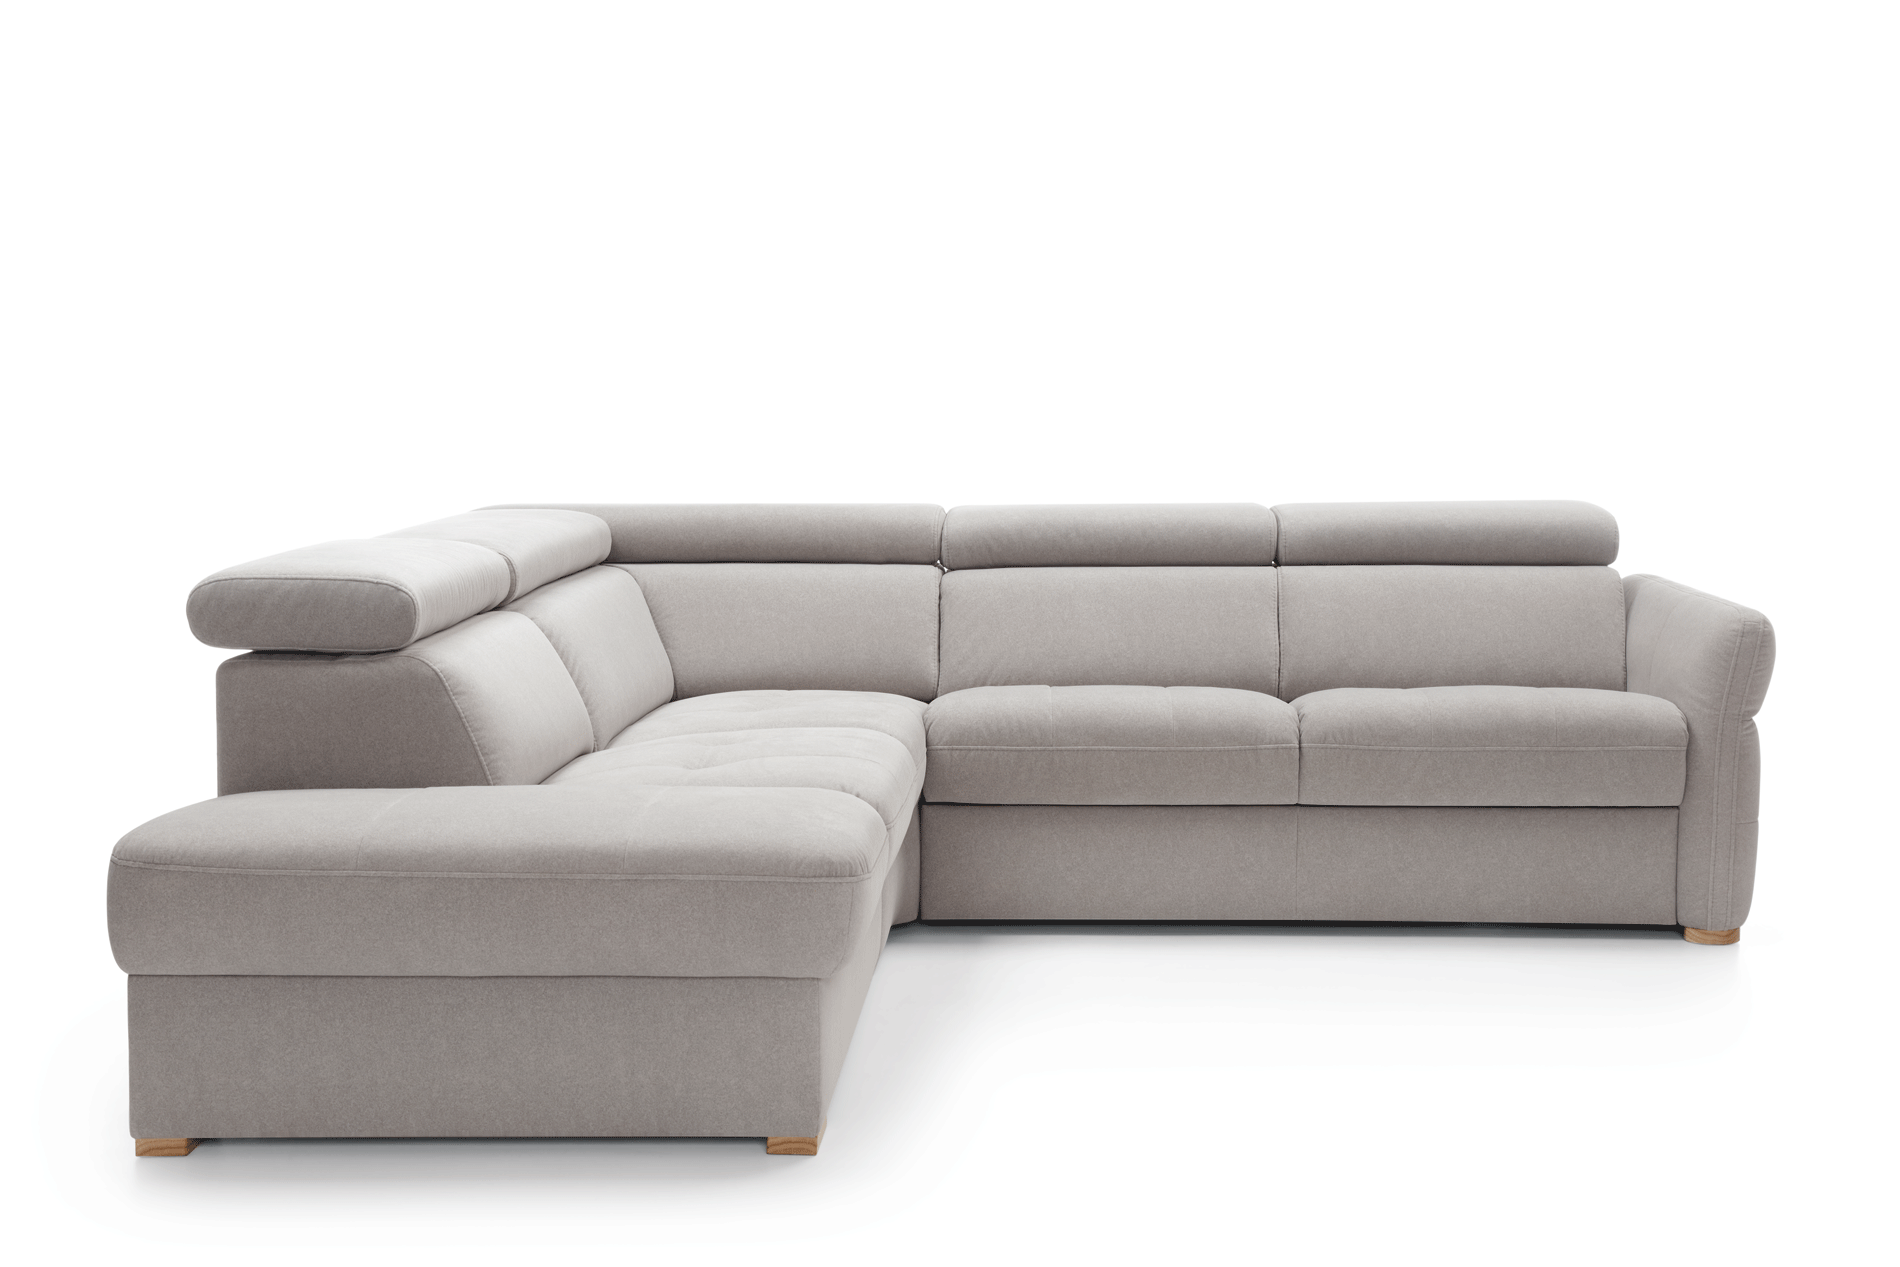 Brands Suinta Modern Collection, Spain Massimo Sectional w/ storage